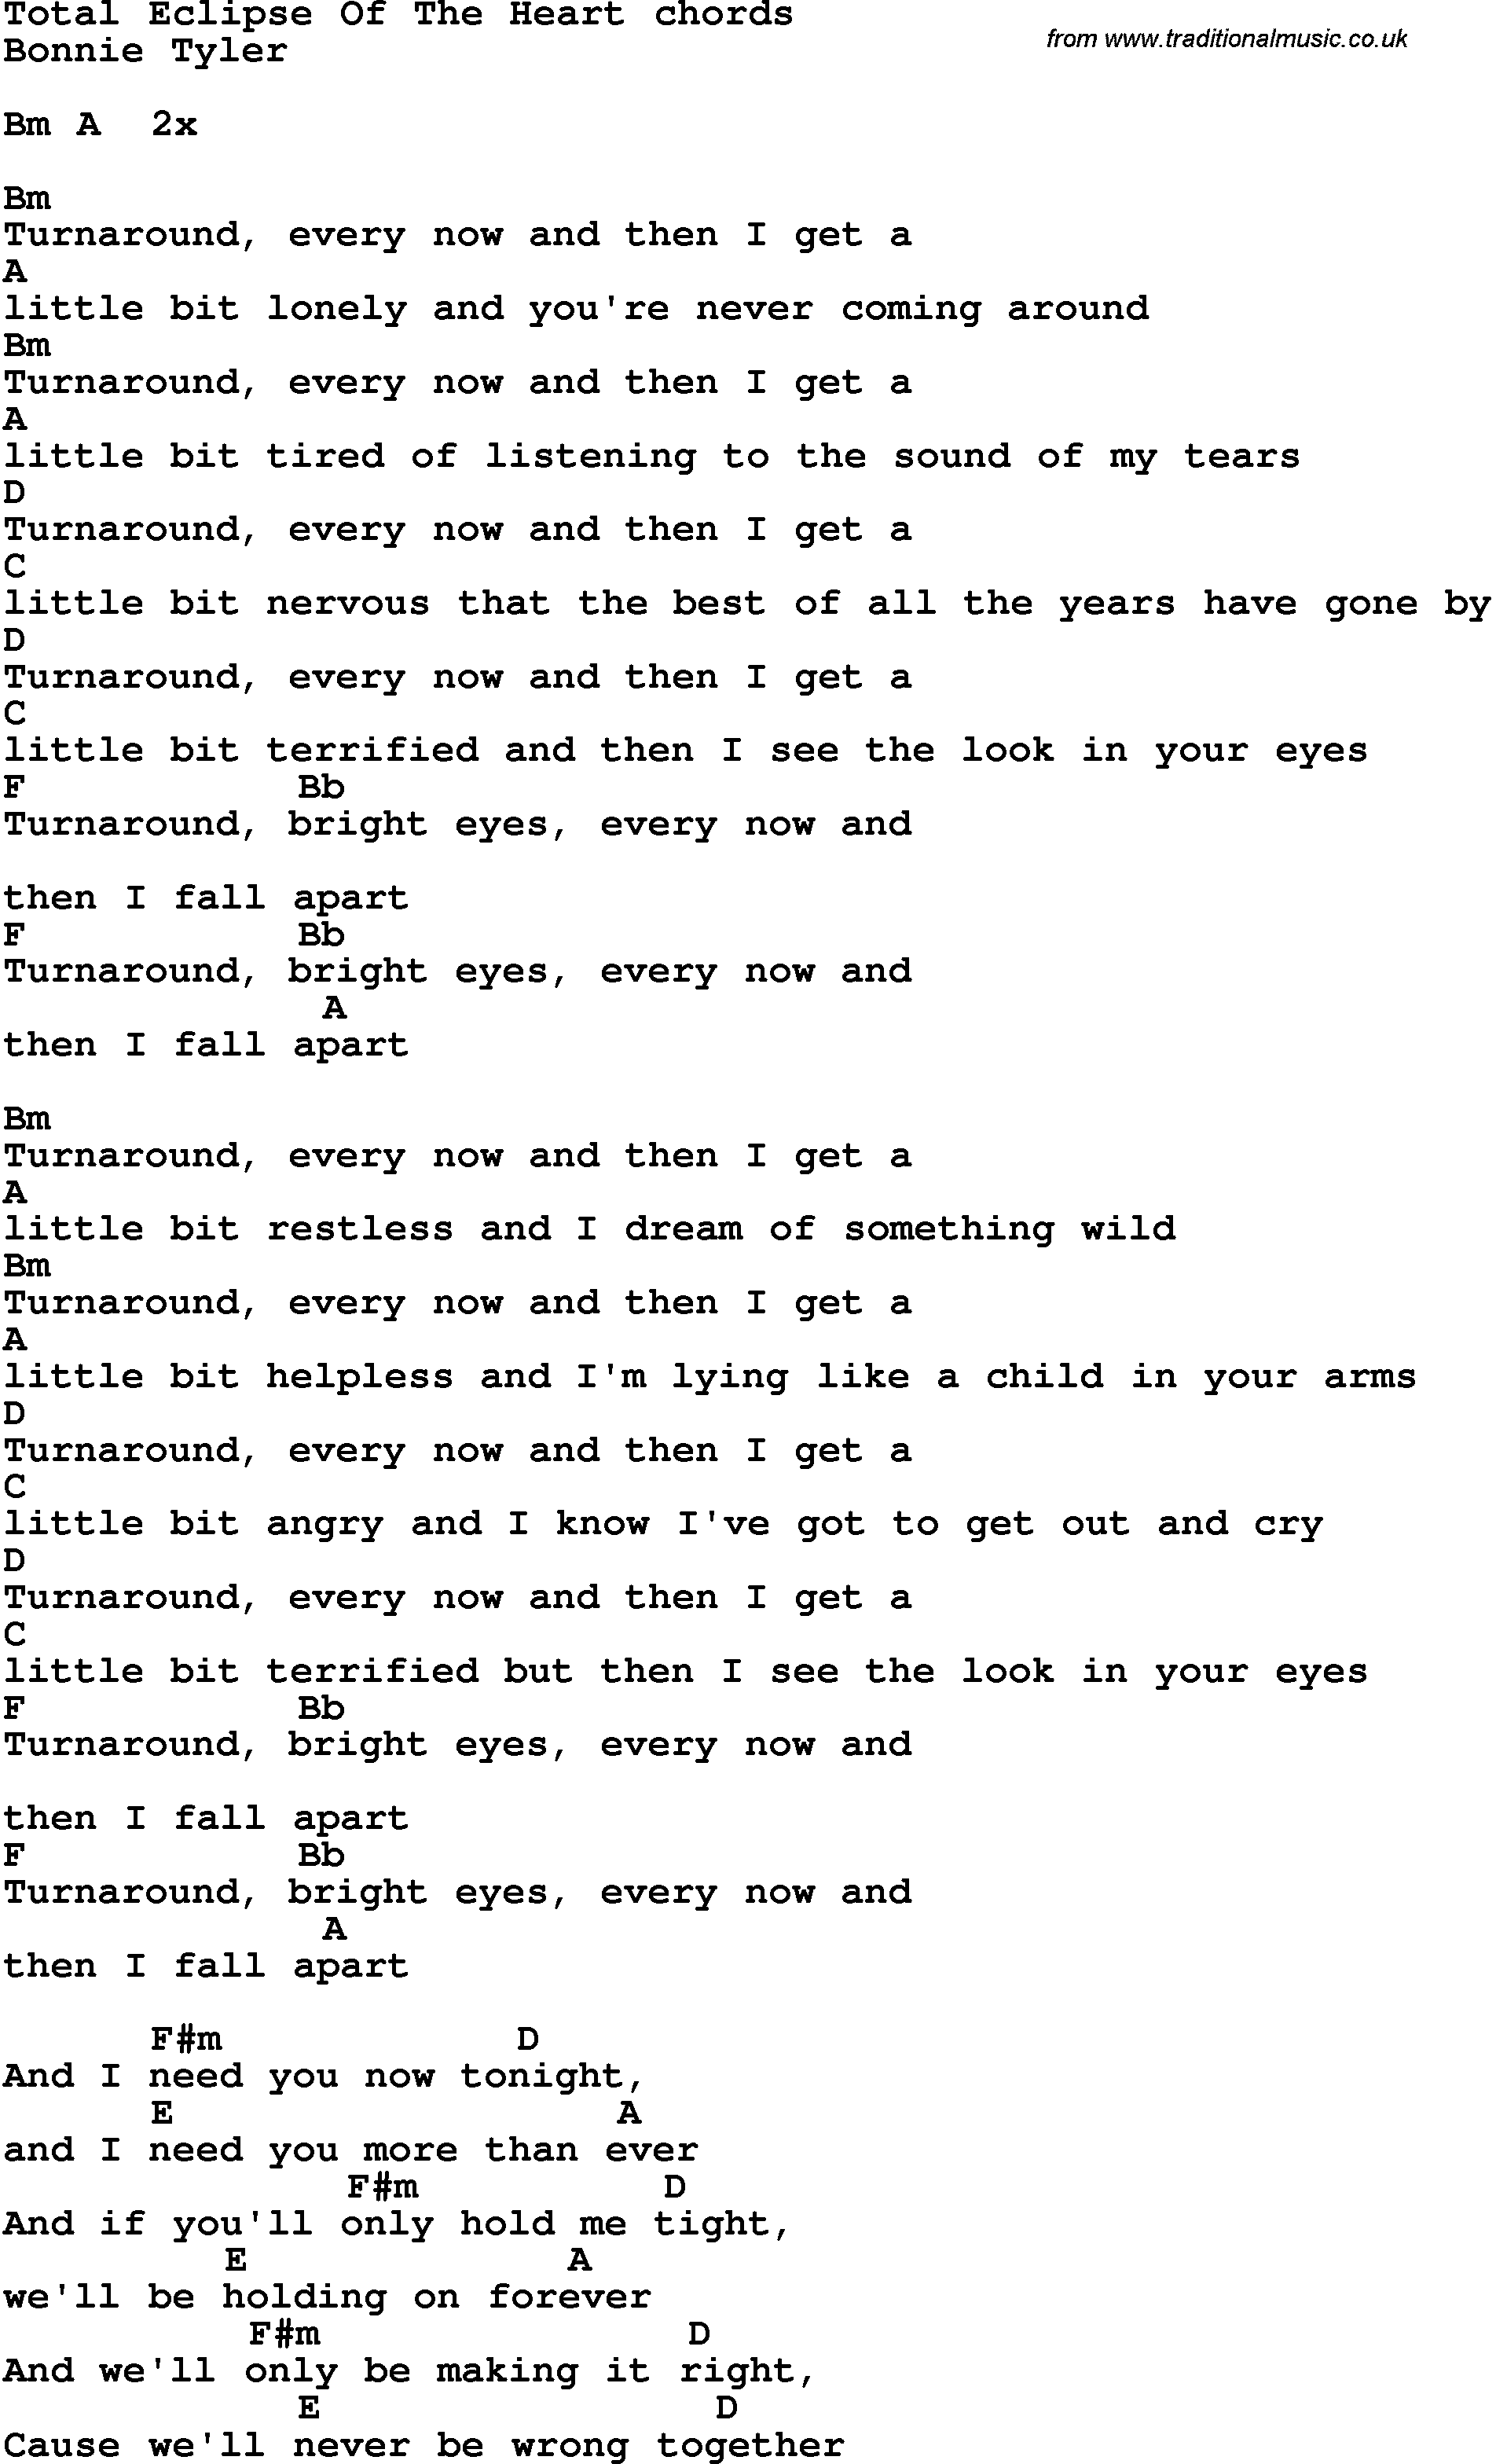 Song Lyrics with guitar chords for Total Eclipse Of The Heart